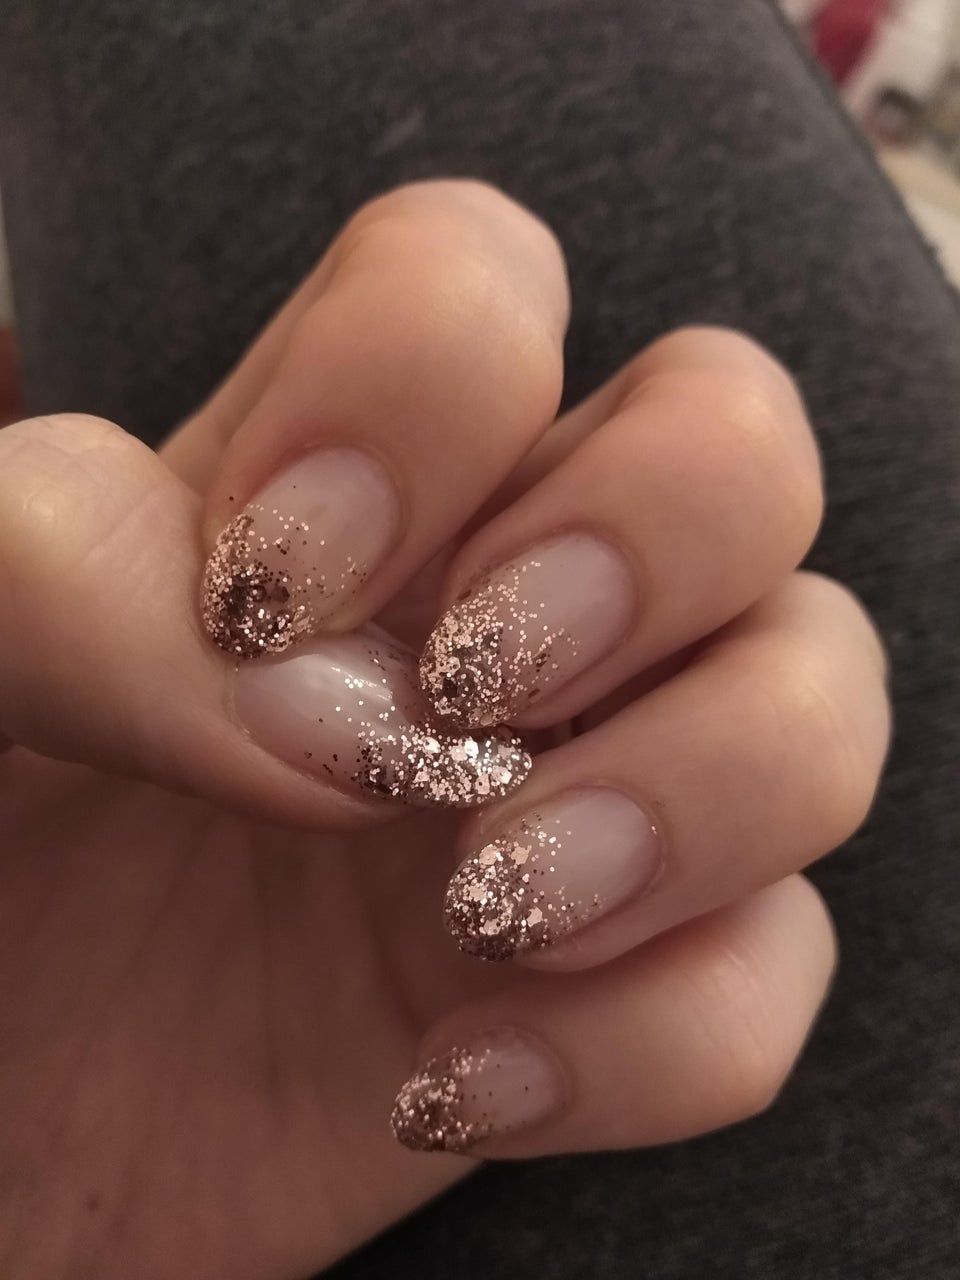 First Attempt At Ombre Glitter Any Tips To Improve Please 😊